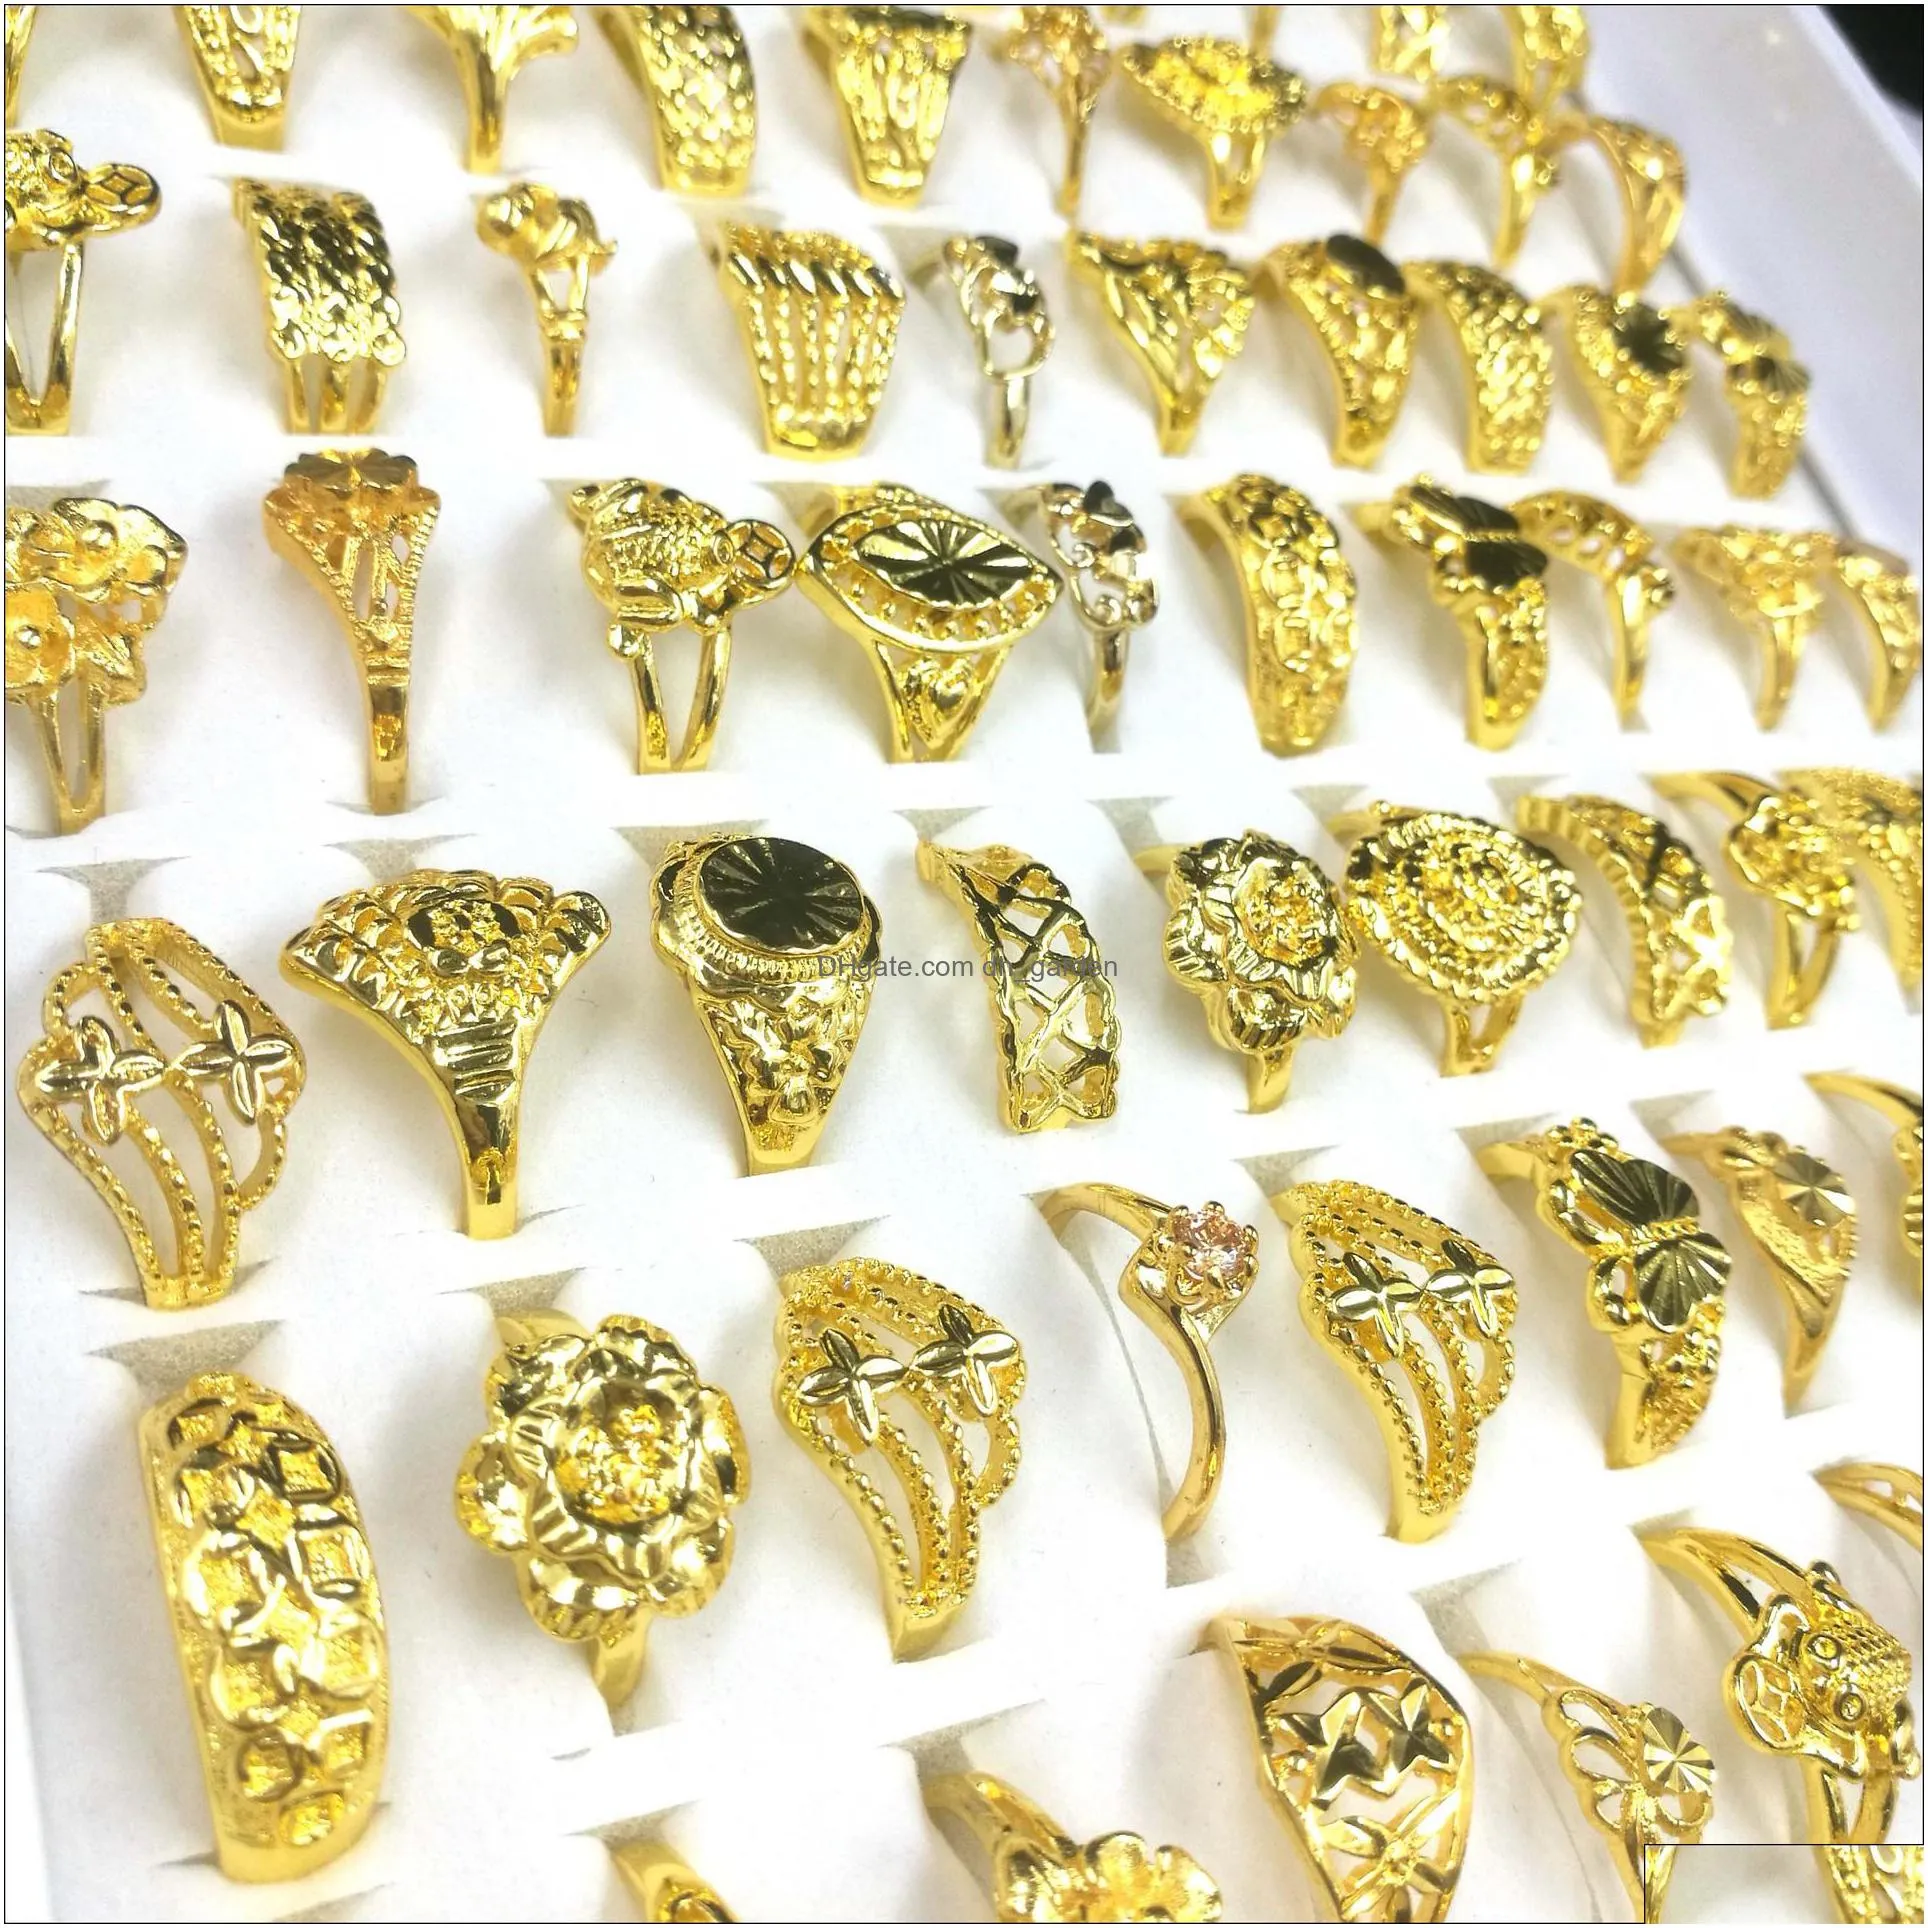 50pcs / gold plated gold ring fashion design charm ring hip hop dance party ladies jewelry